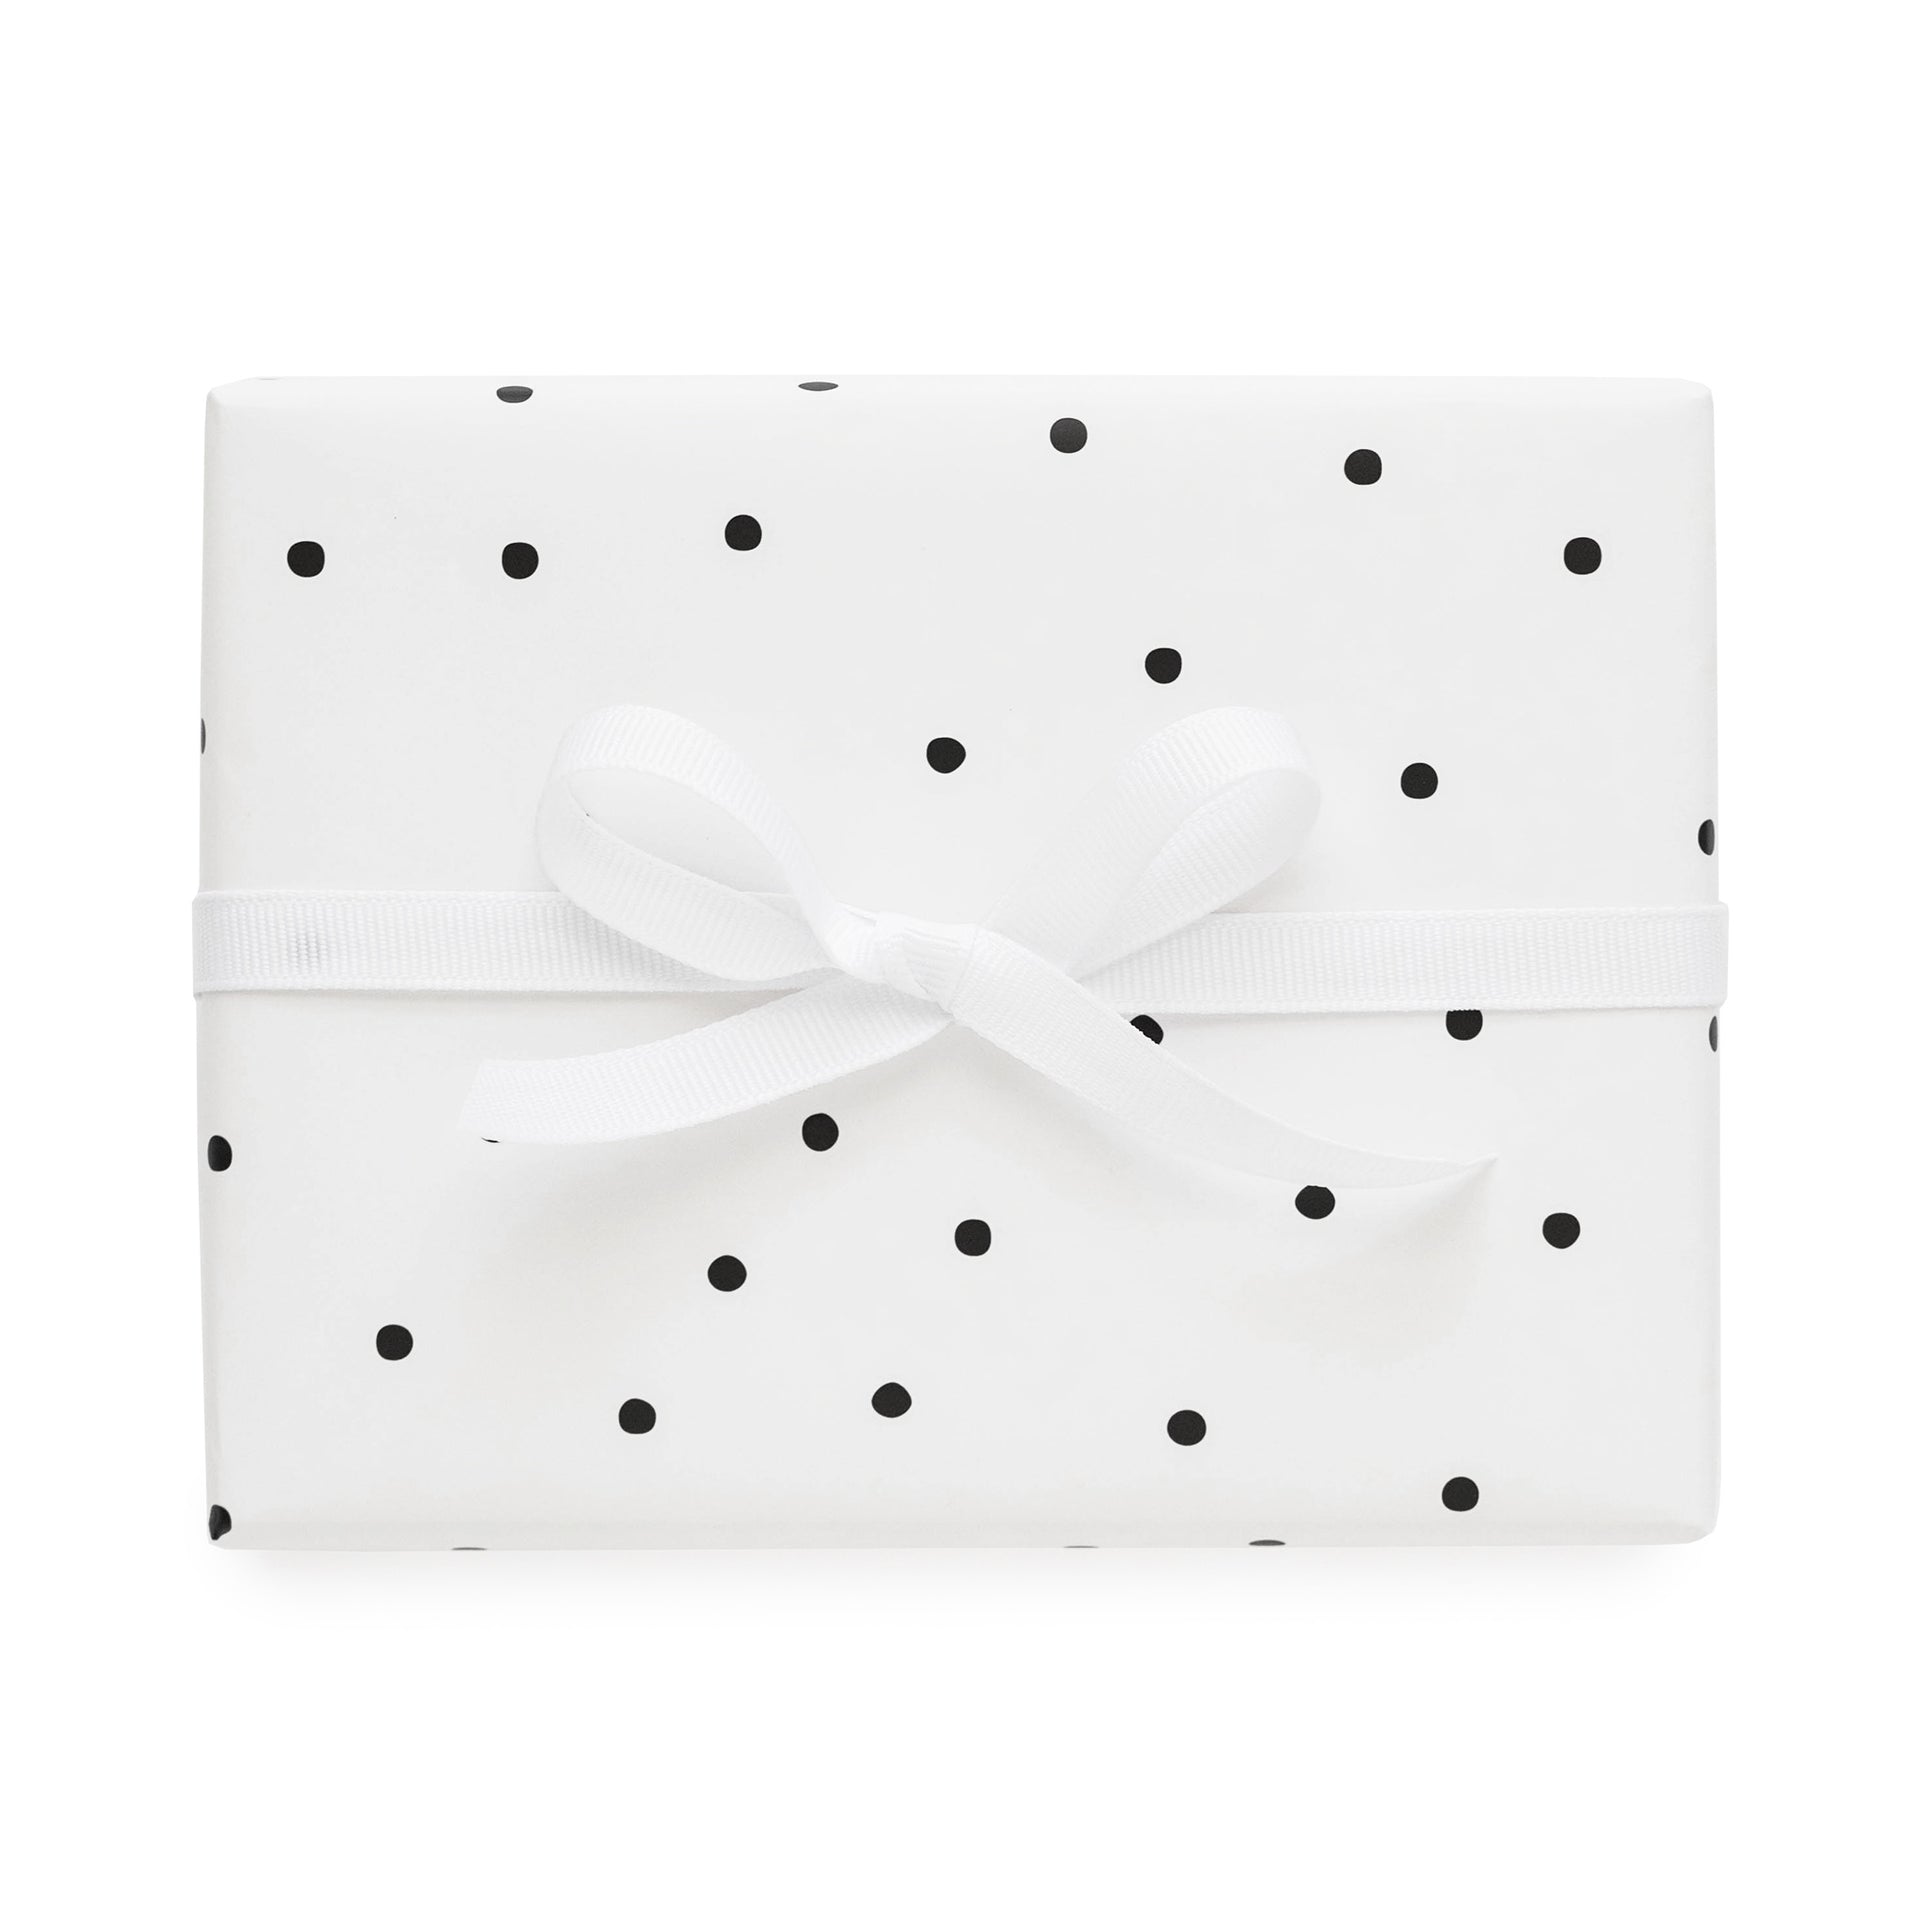 Black Scatter Dot Wrapping Paper